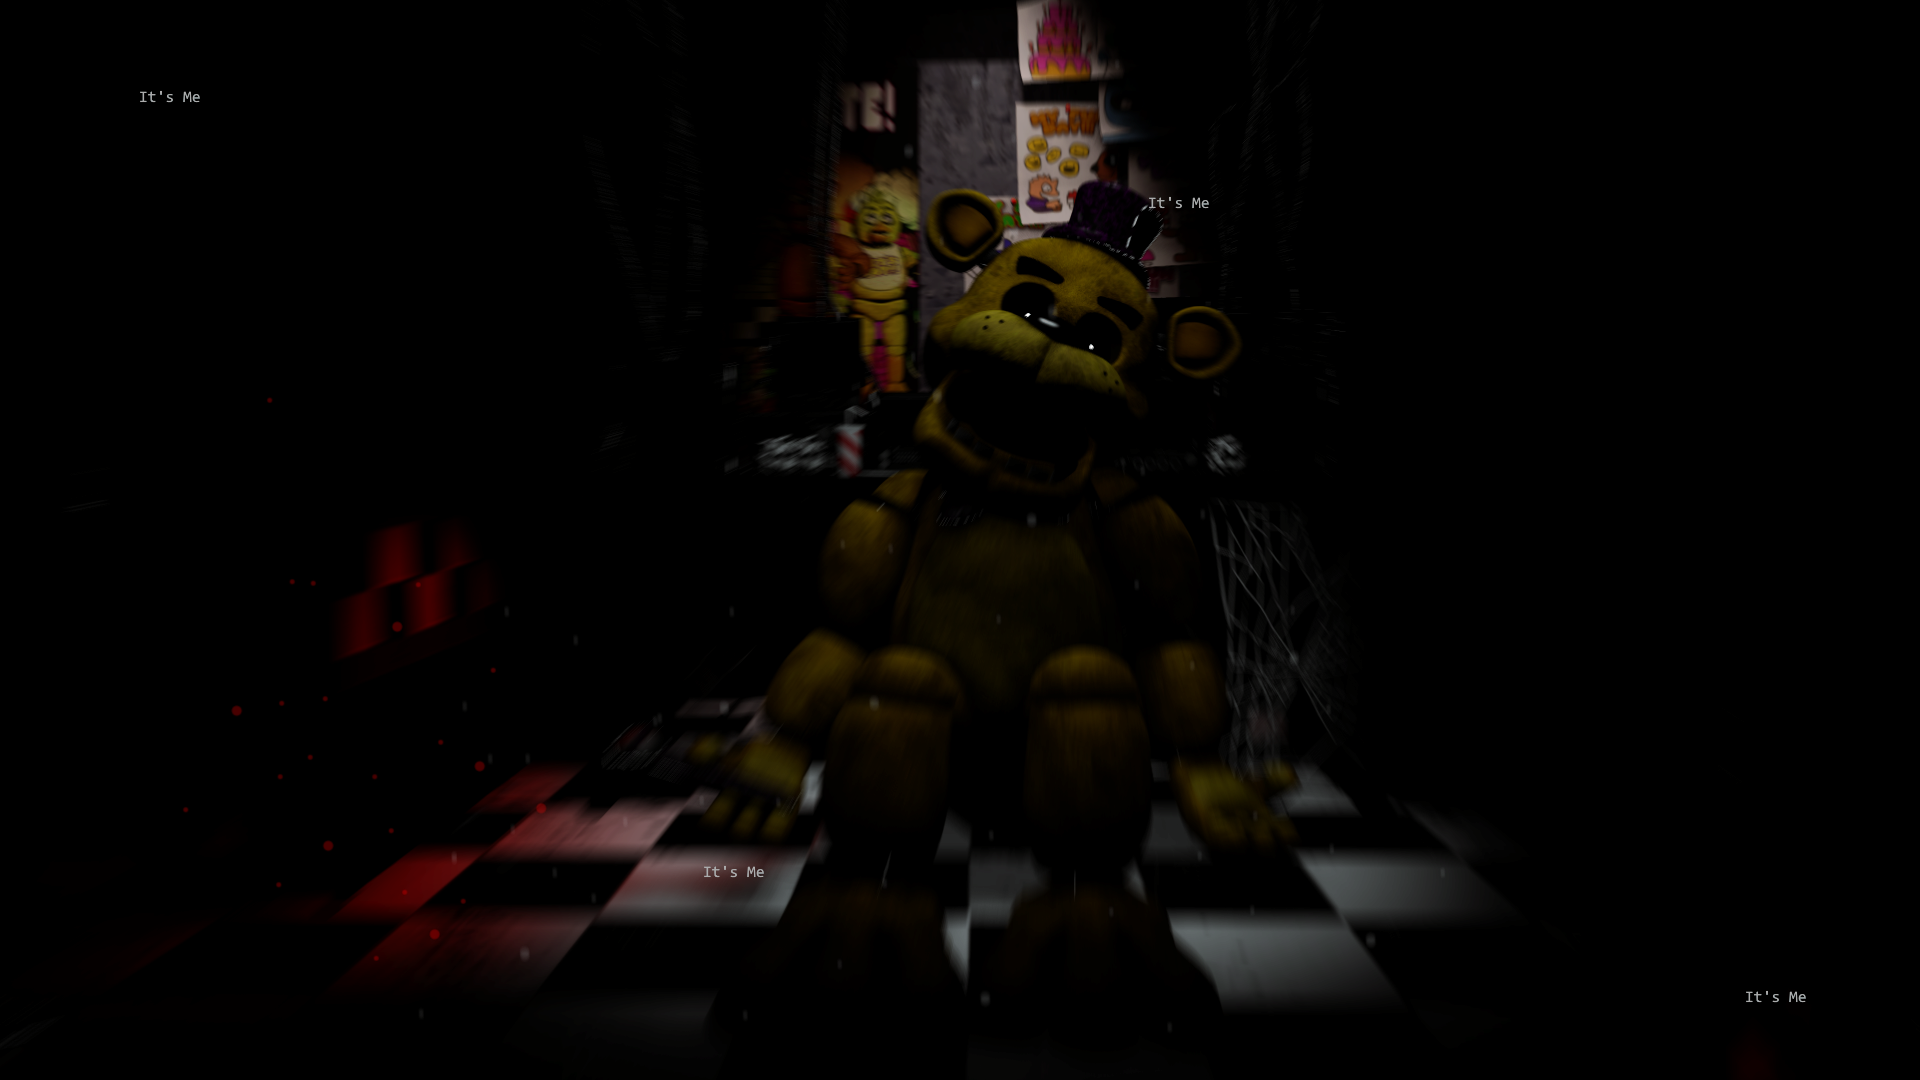 Golden Freddy Image Wallpapers